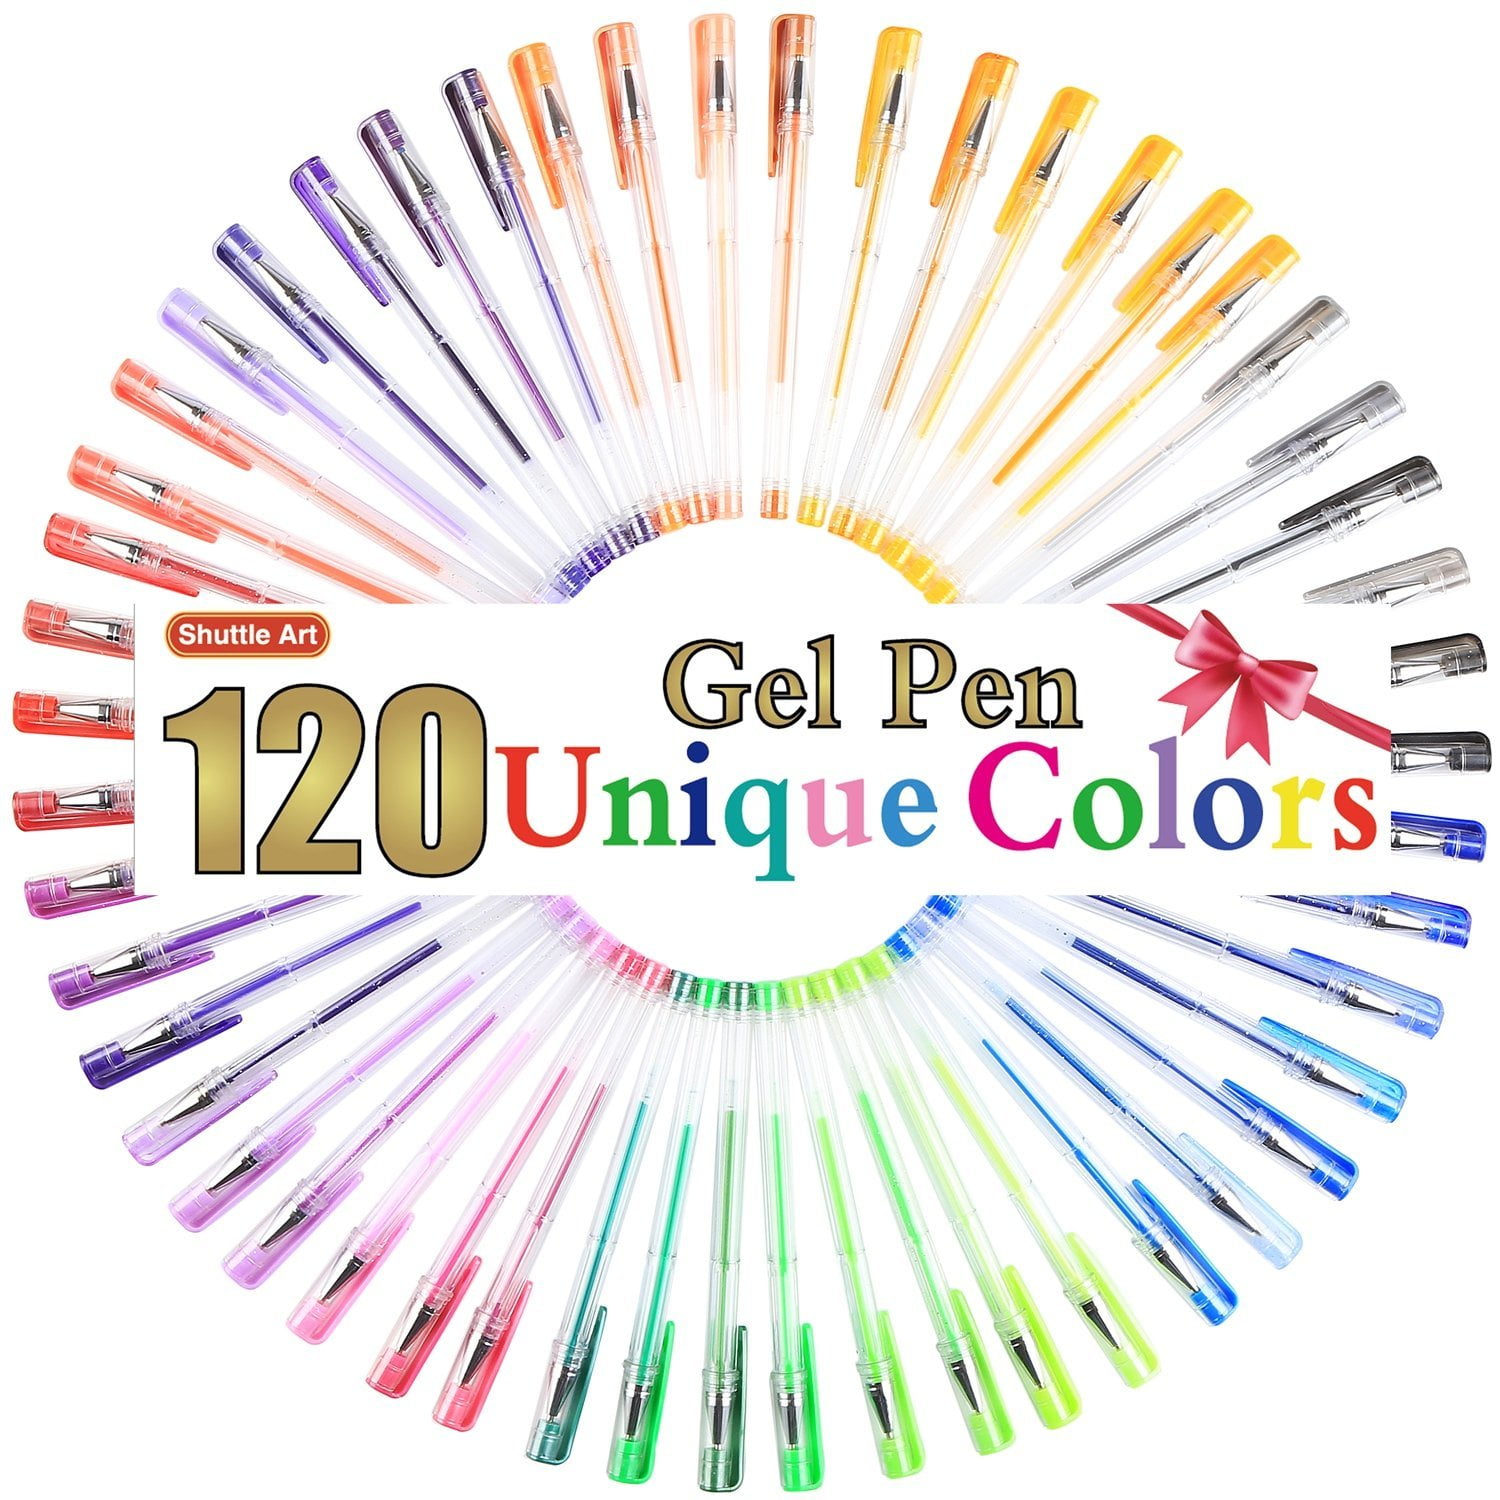 120 Unique Colors Gel Pens Set - Perfect For Adult Coloring Books,  Doodling, Drawing, Writing & Sketching! Christmas、Halloween、Thanksgiving Day